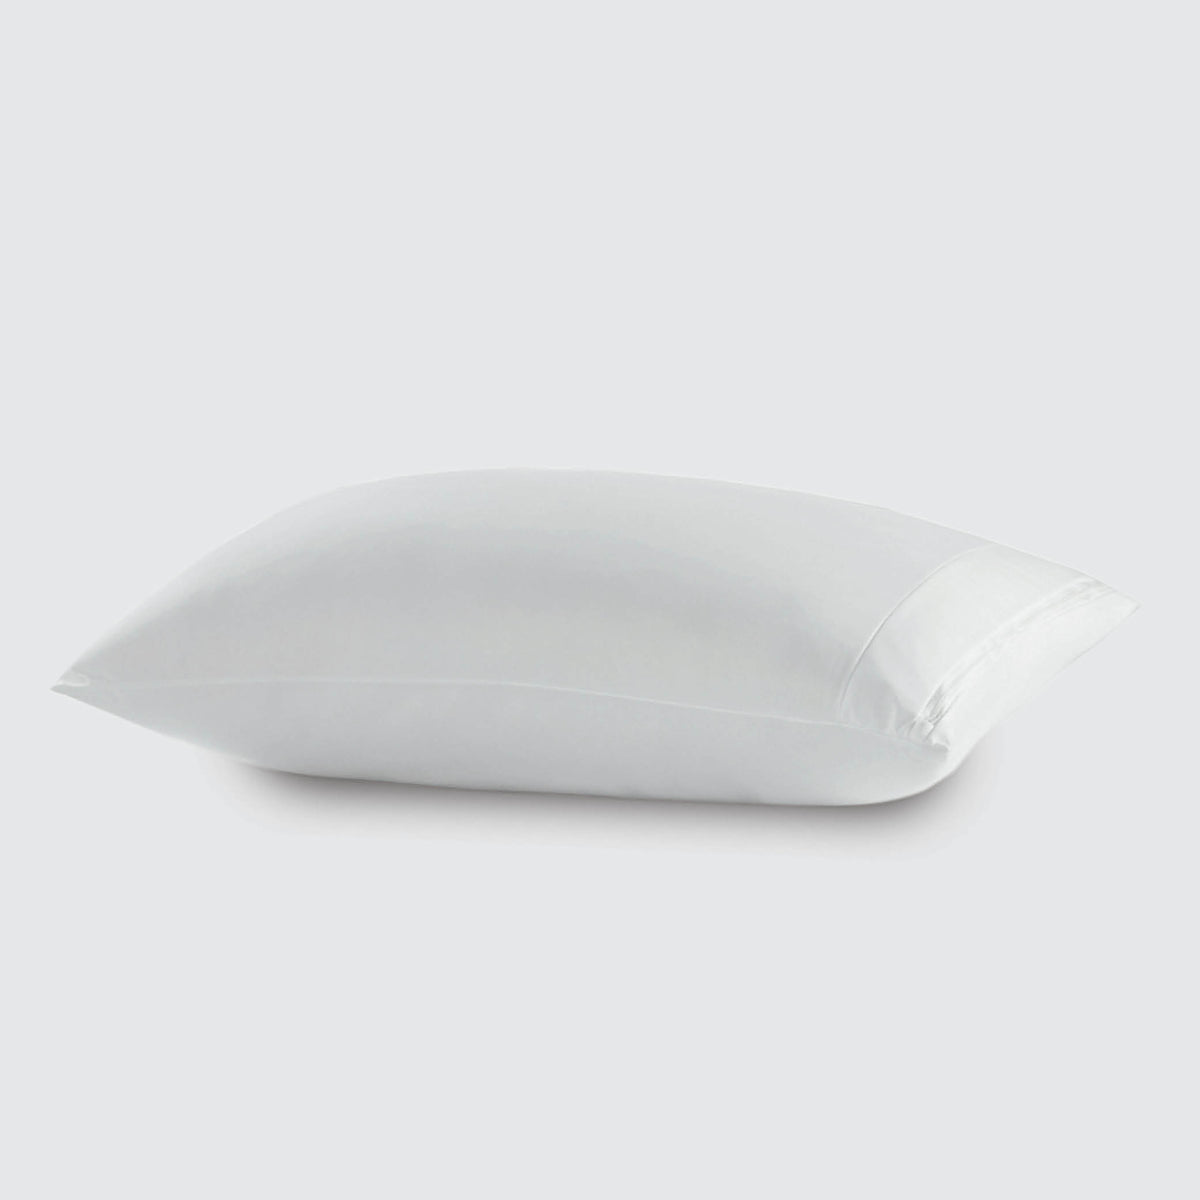 Image of a white pillow protector on a pillow with a white background